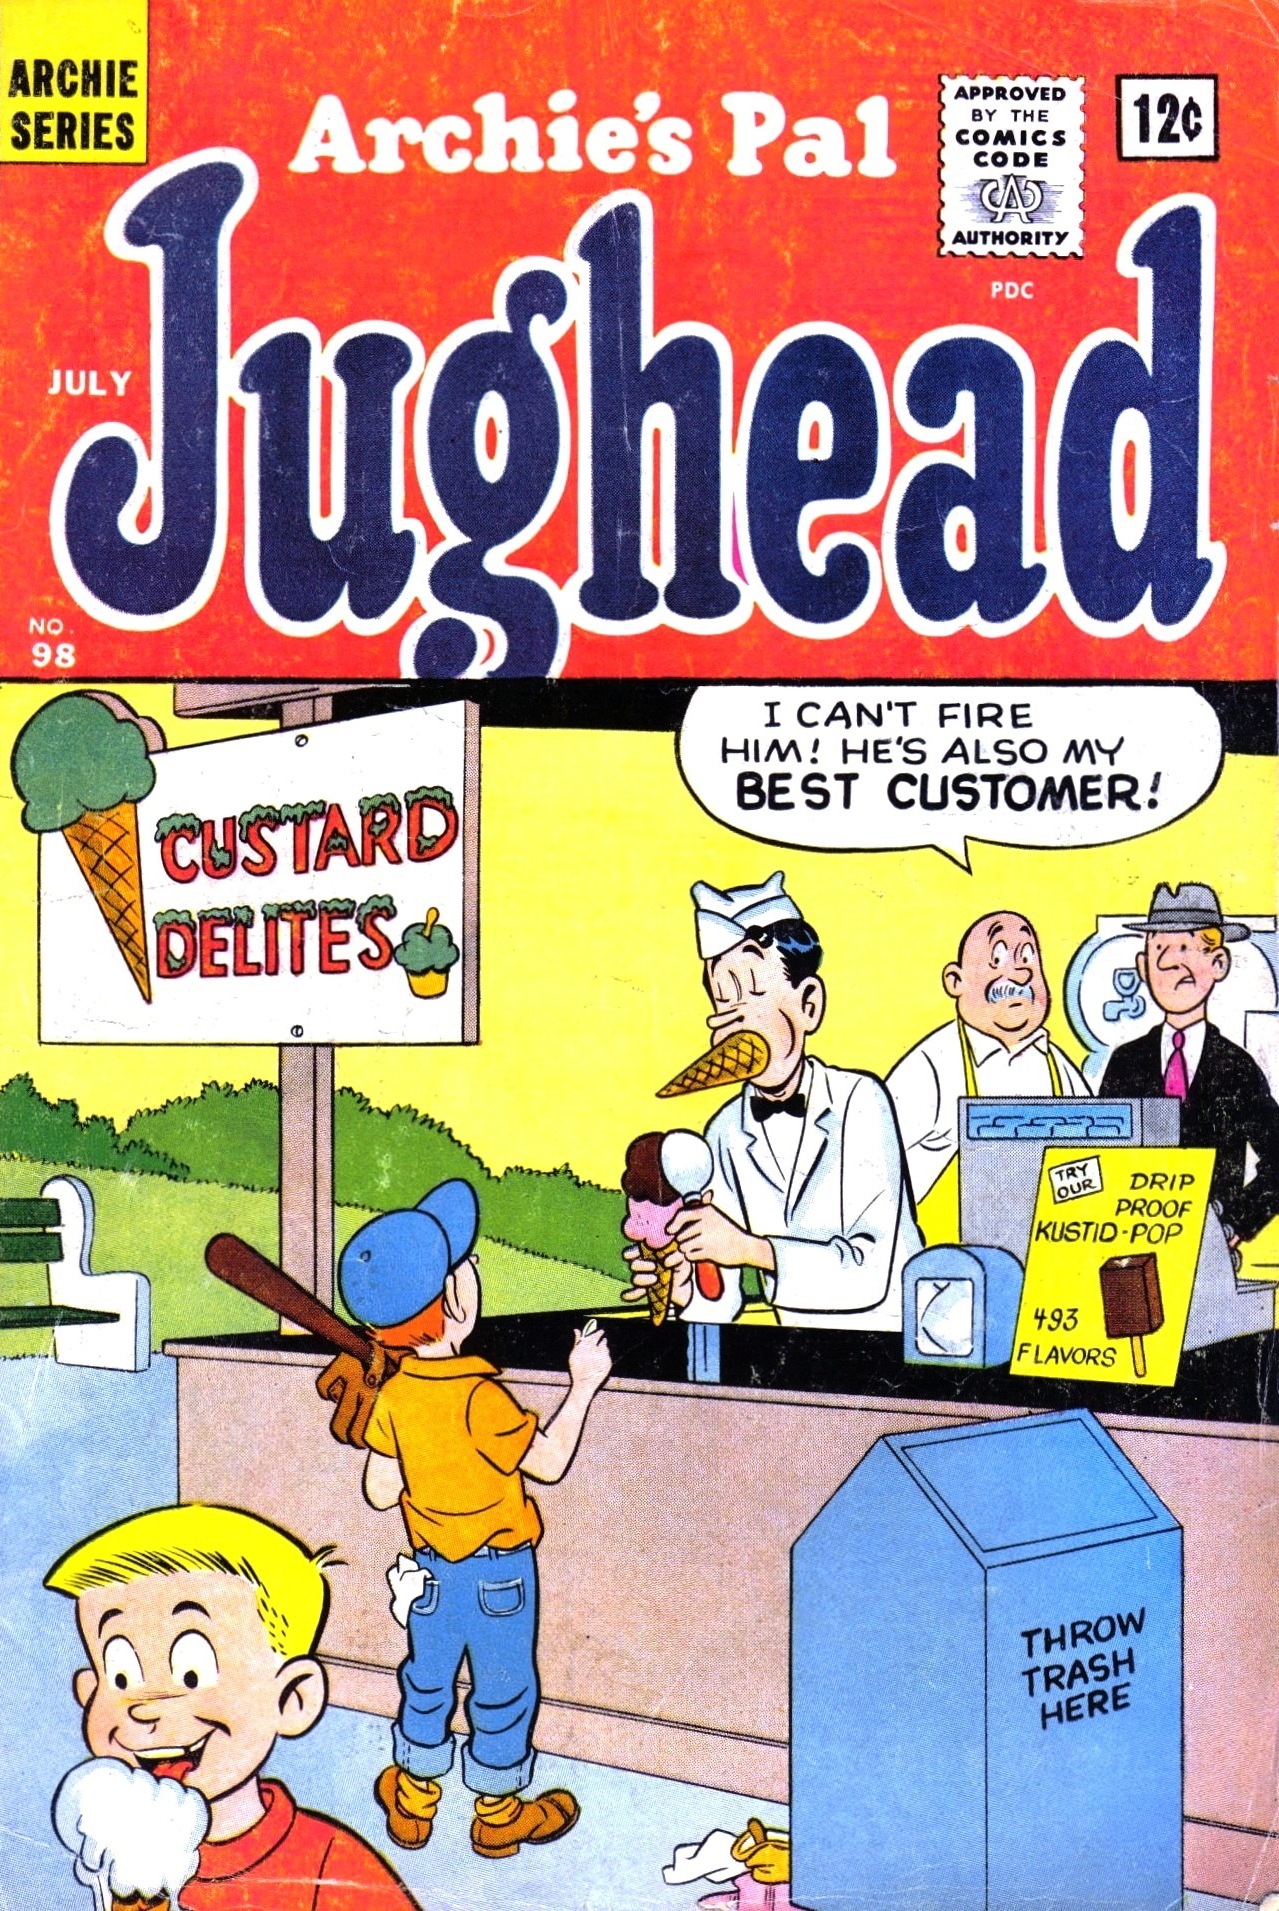 Read online Archie's Pal Jughead comic -  Issue #98 - 1